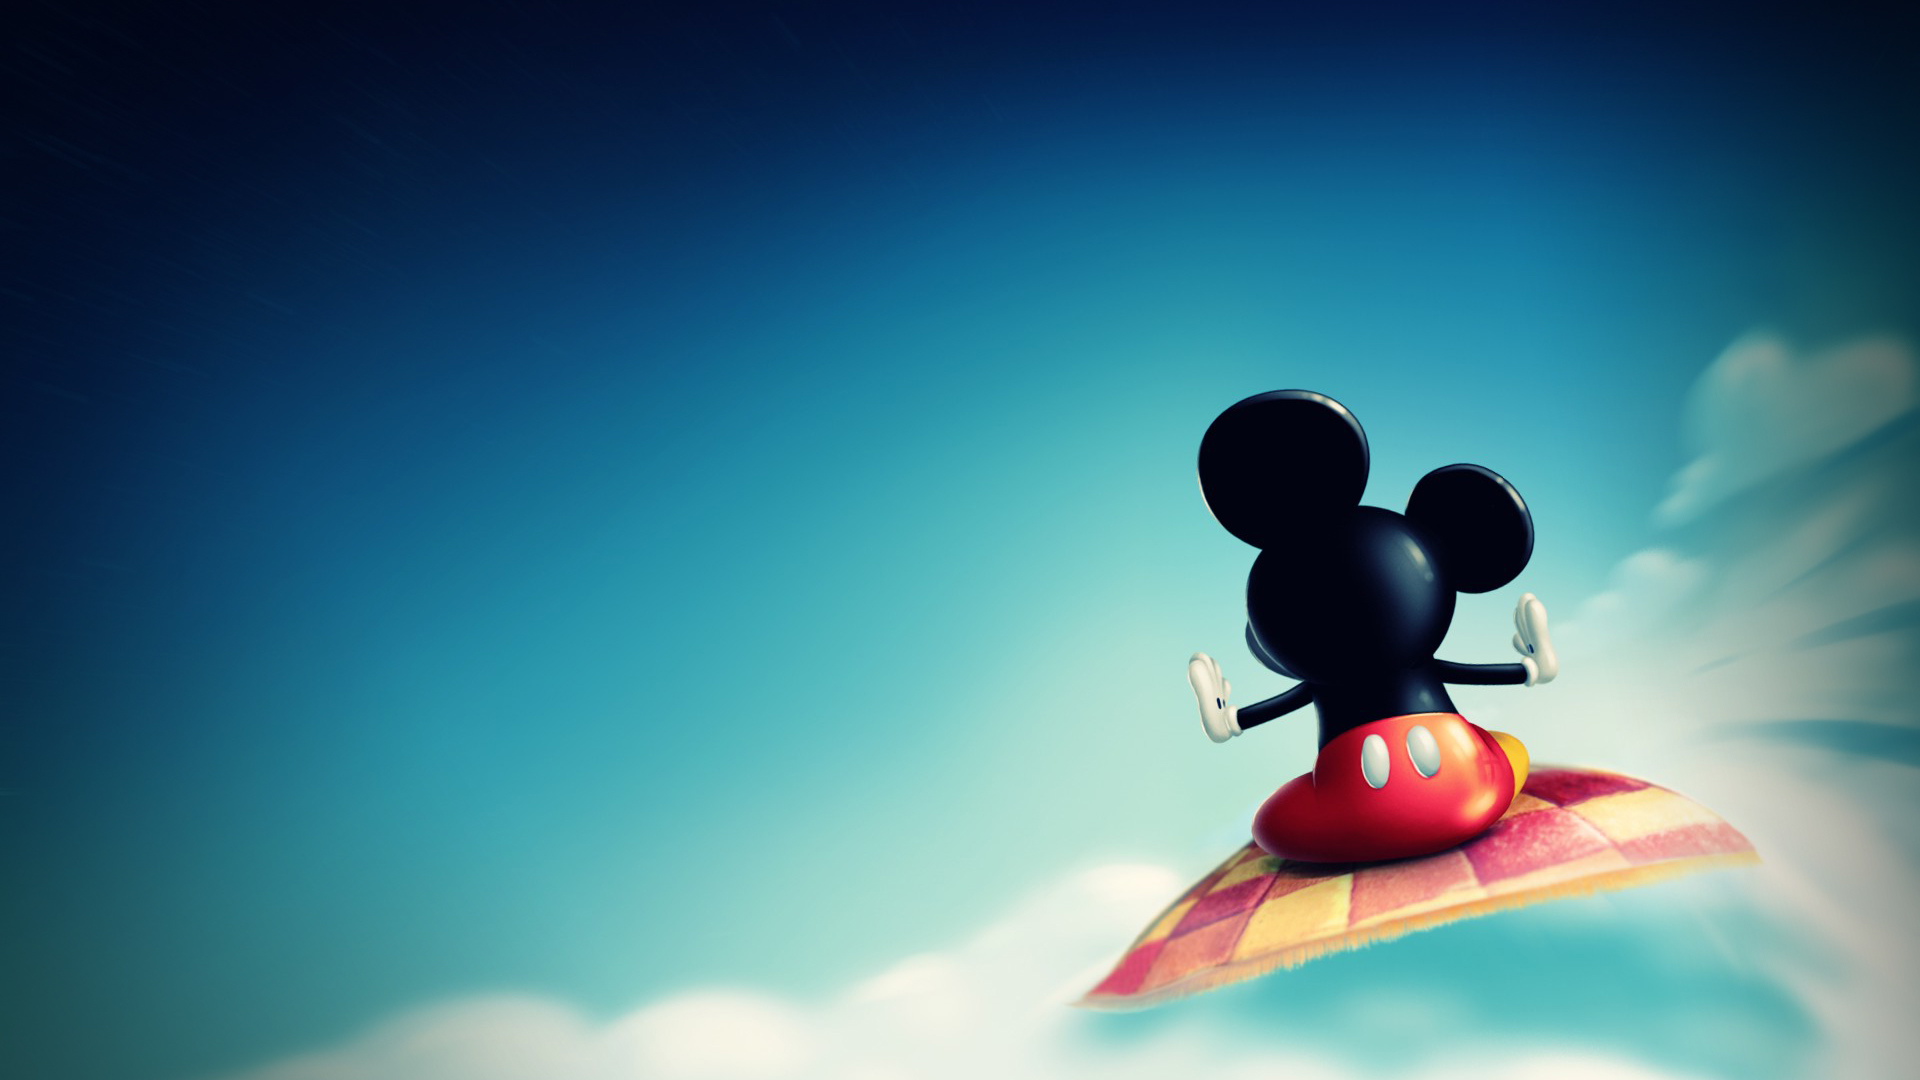  Mouse Full HD Full HD Wallpapers download 1080p desktop backgrounds